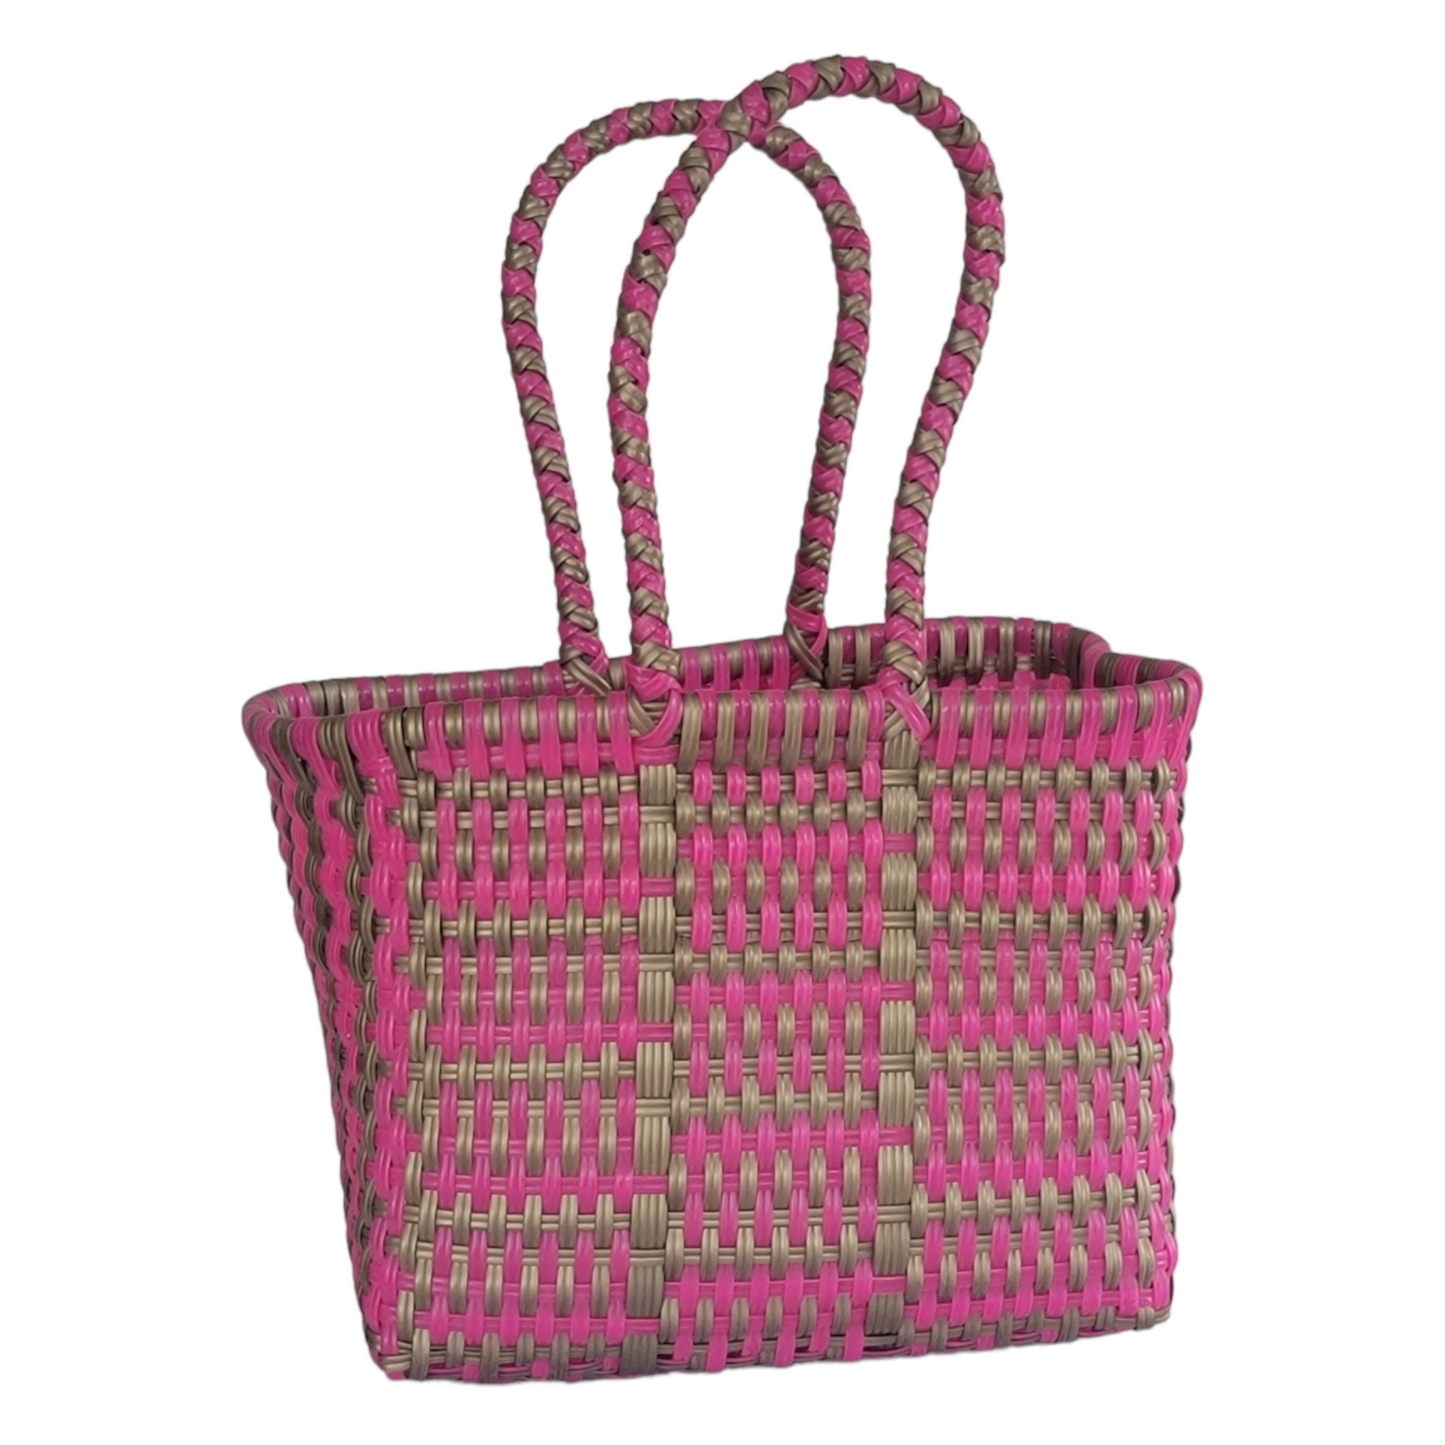 Fucsia & Central Gold Mini Tote | Handwoven recycled bags